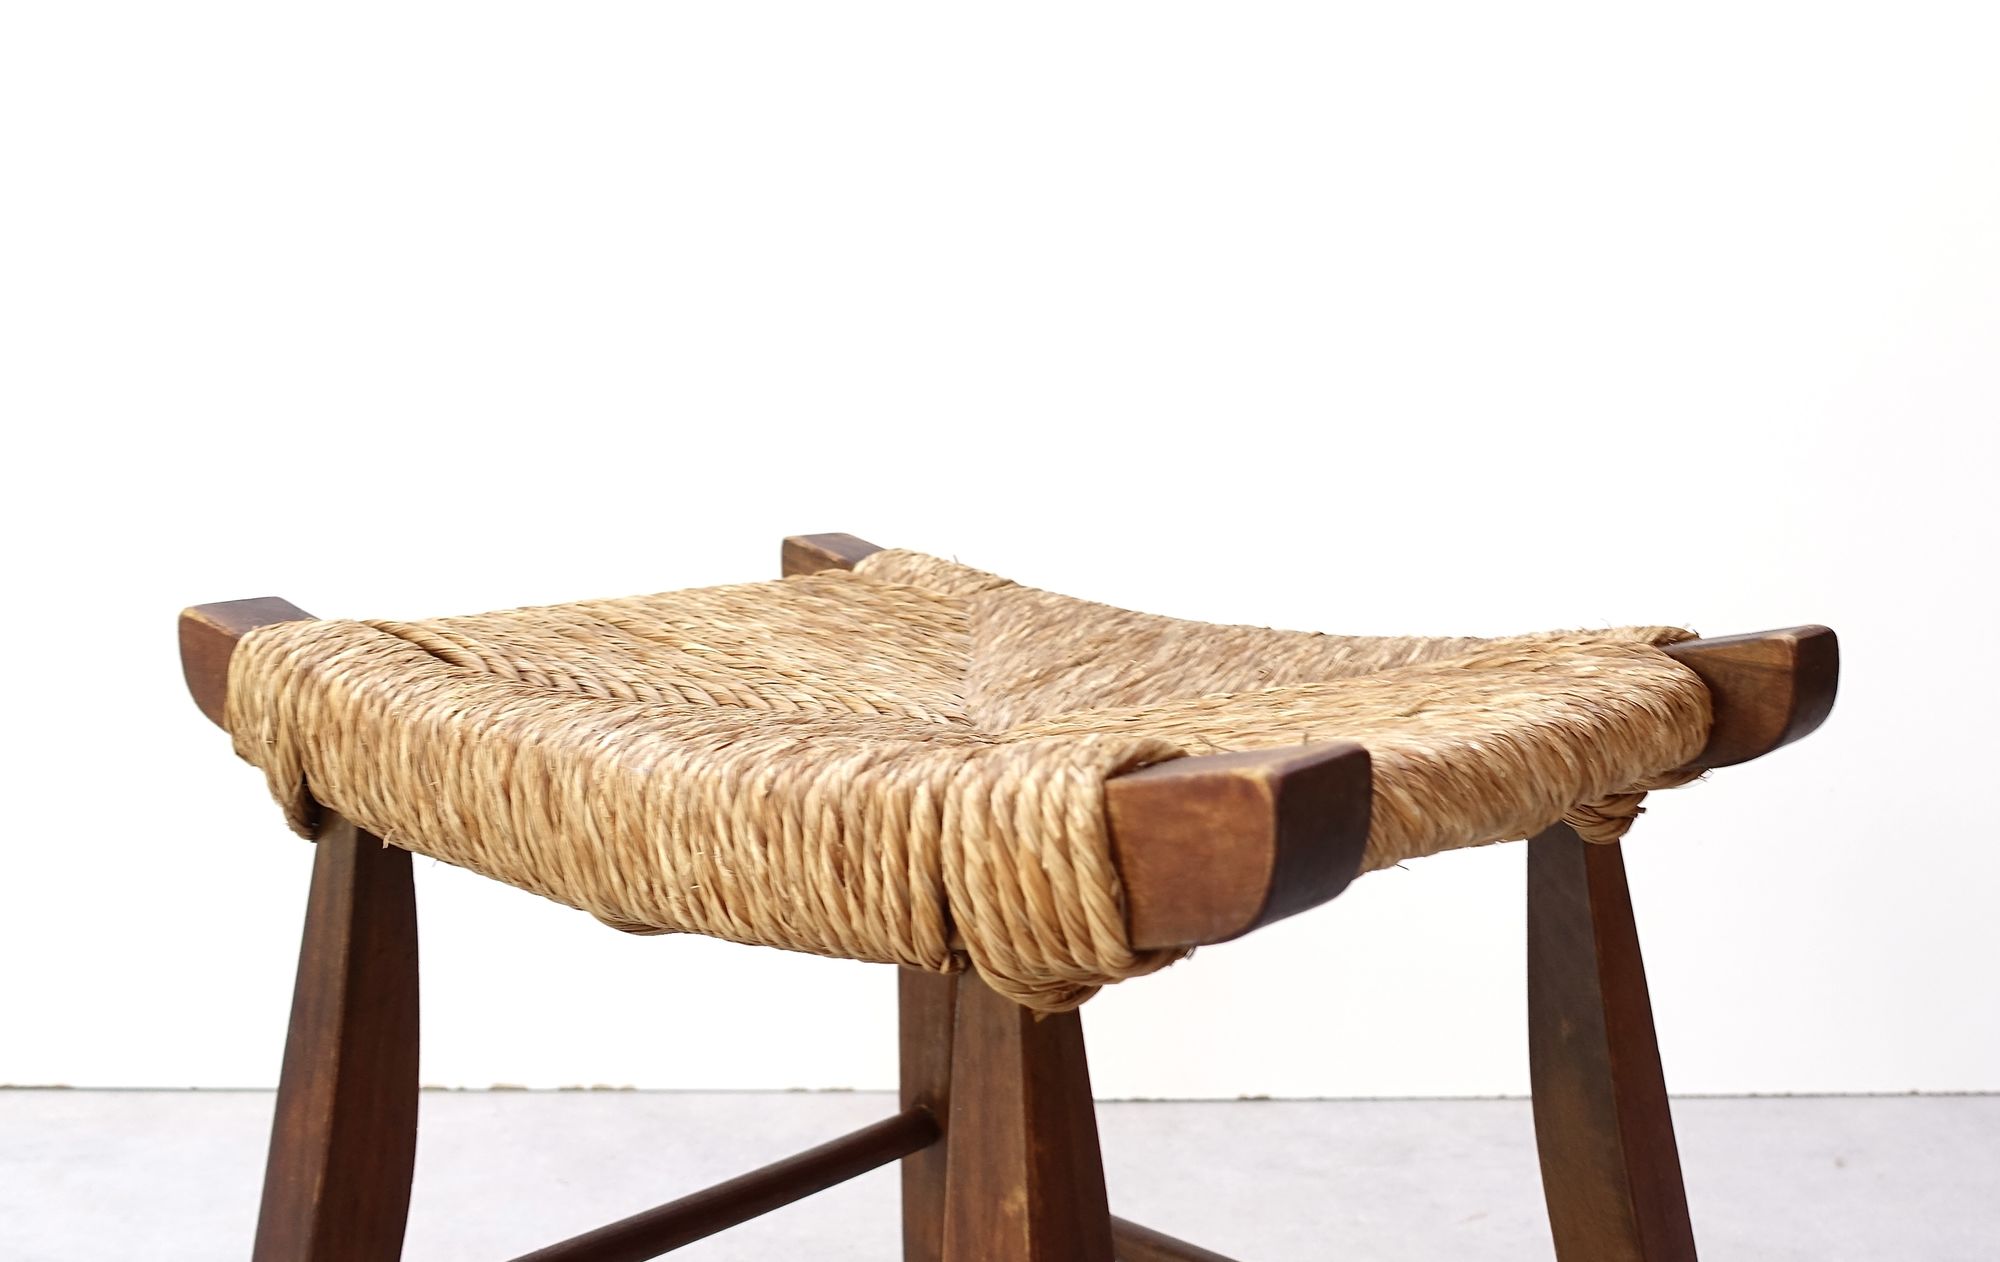 Stool in solid wood and straw, Swiss provenance